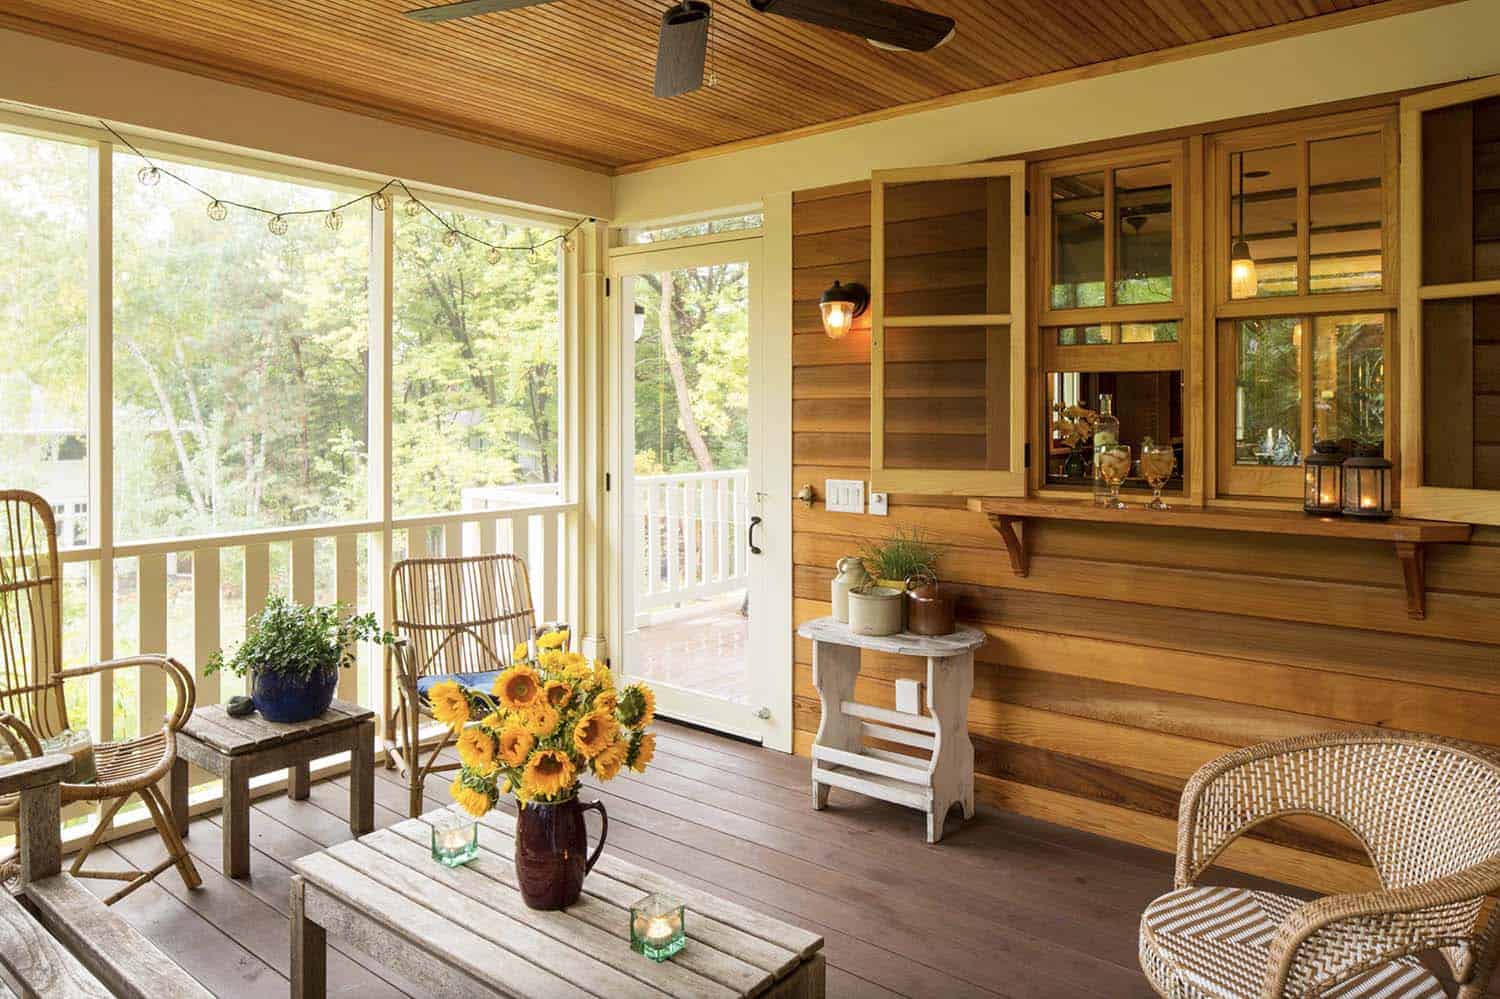 pass through kitchen window into a screened porch